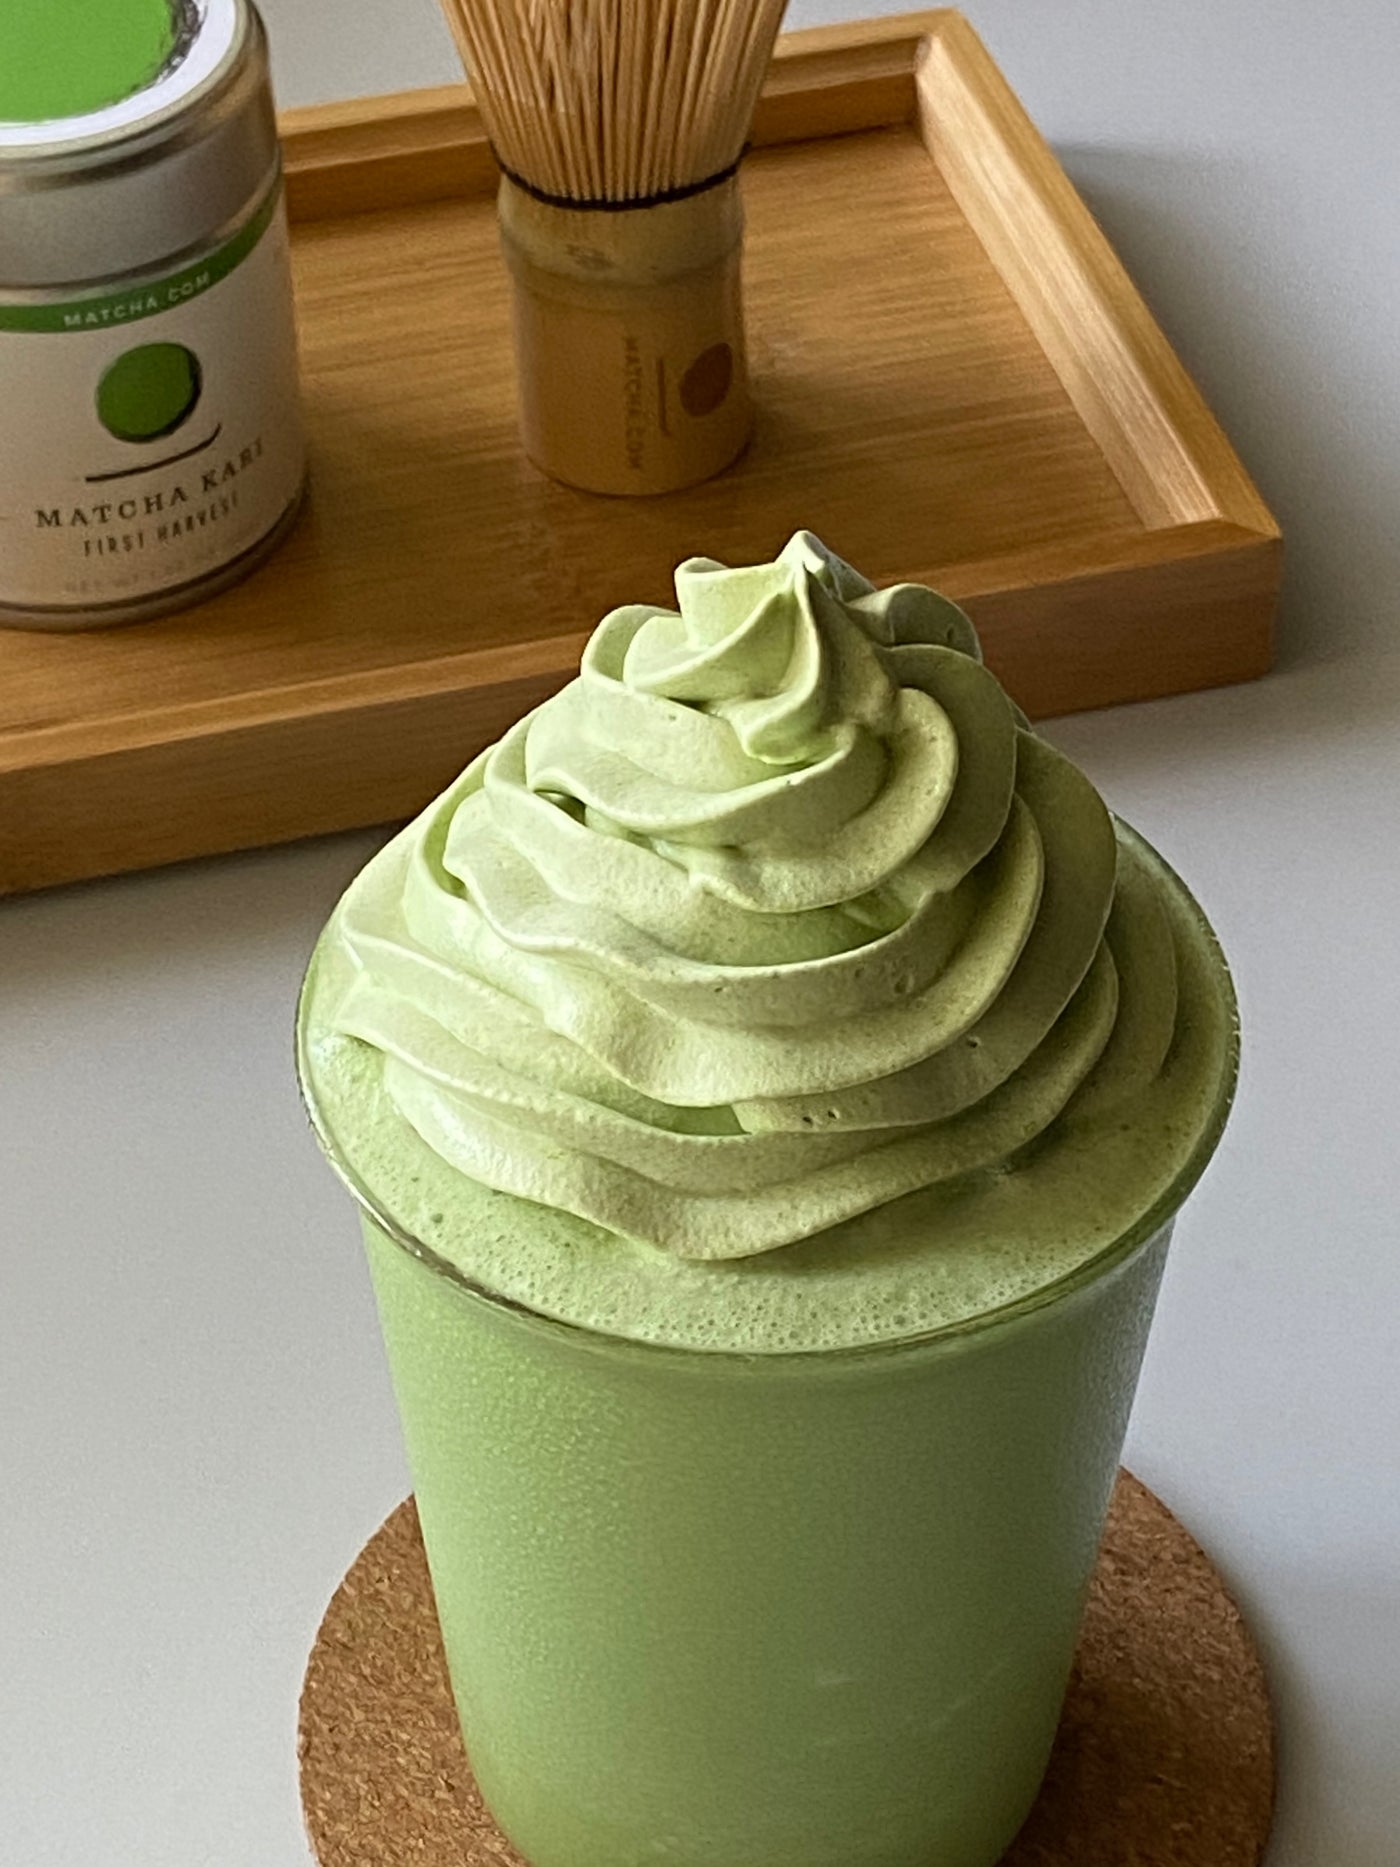 Here's how to make this simple yet delightful matcha frappuccino recipe at home: